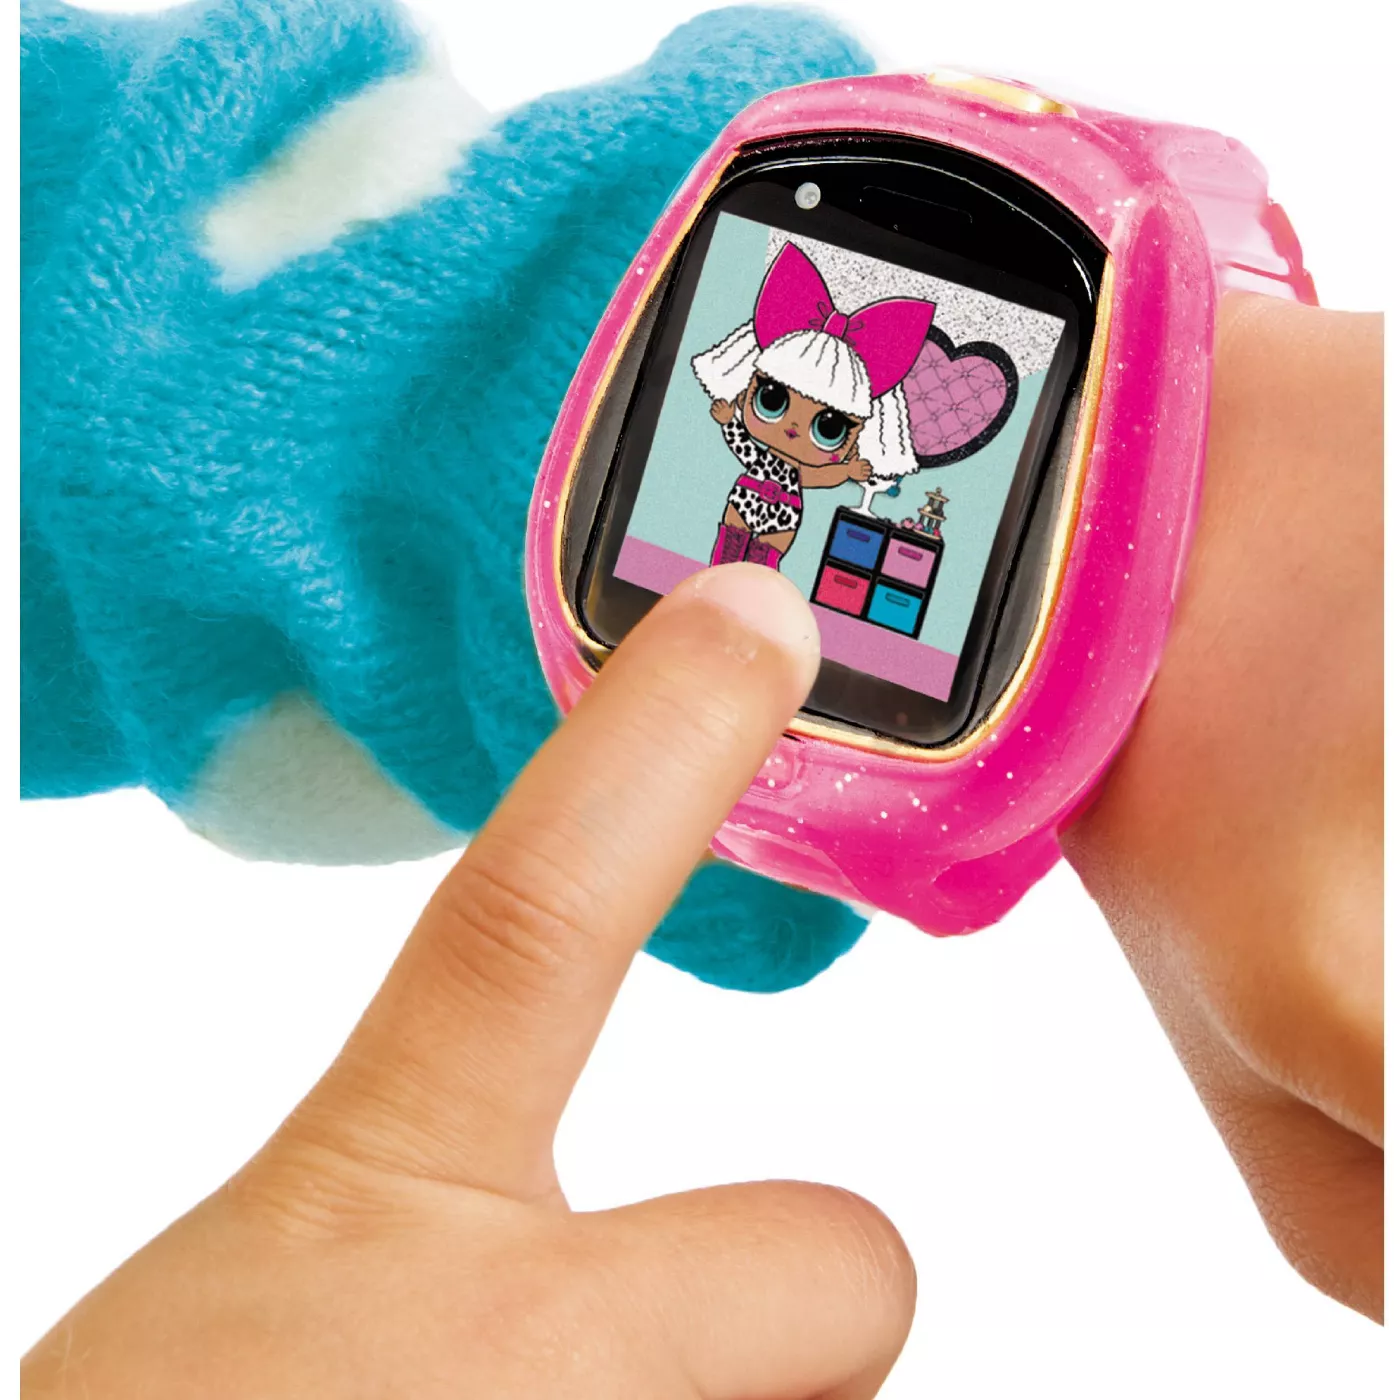 L.O.L. Surprise! Smartwatch! Pink -  Camera, Video, Games, Activities and More - £16.23 GBP